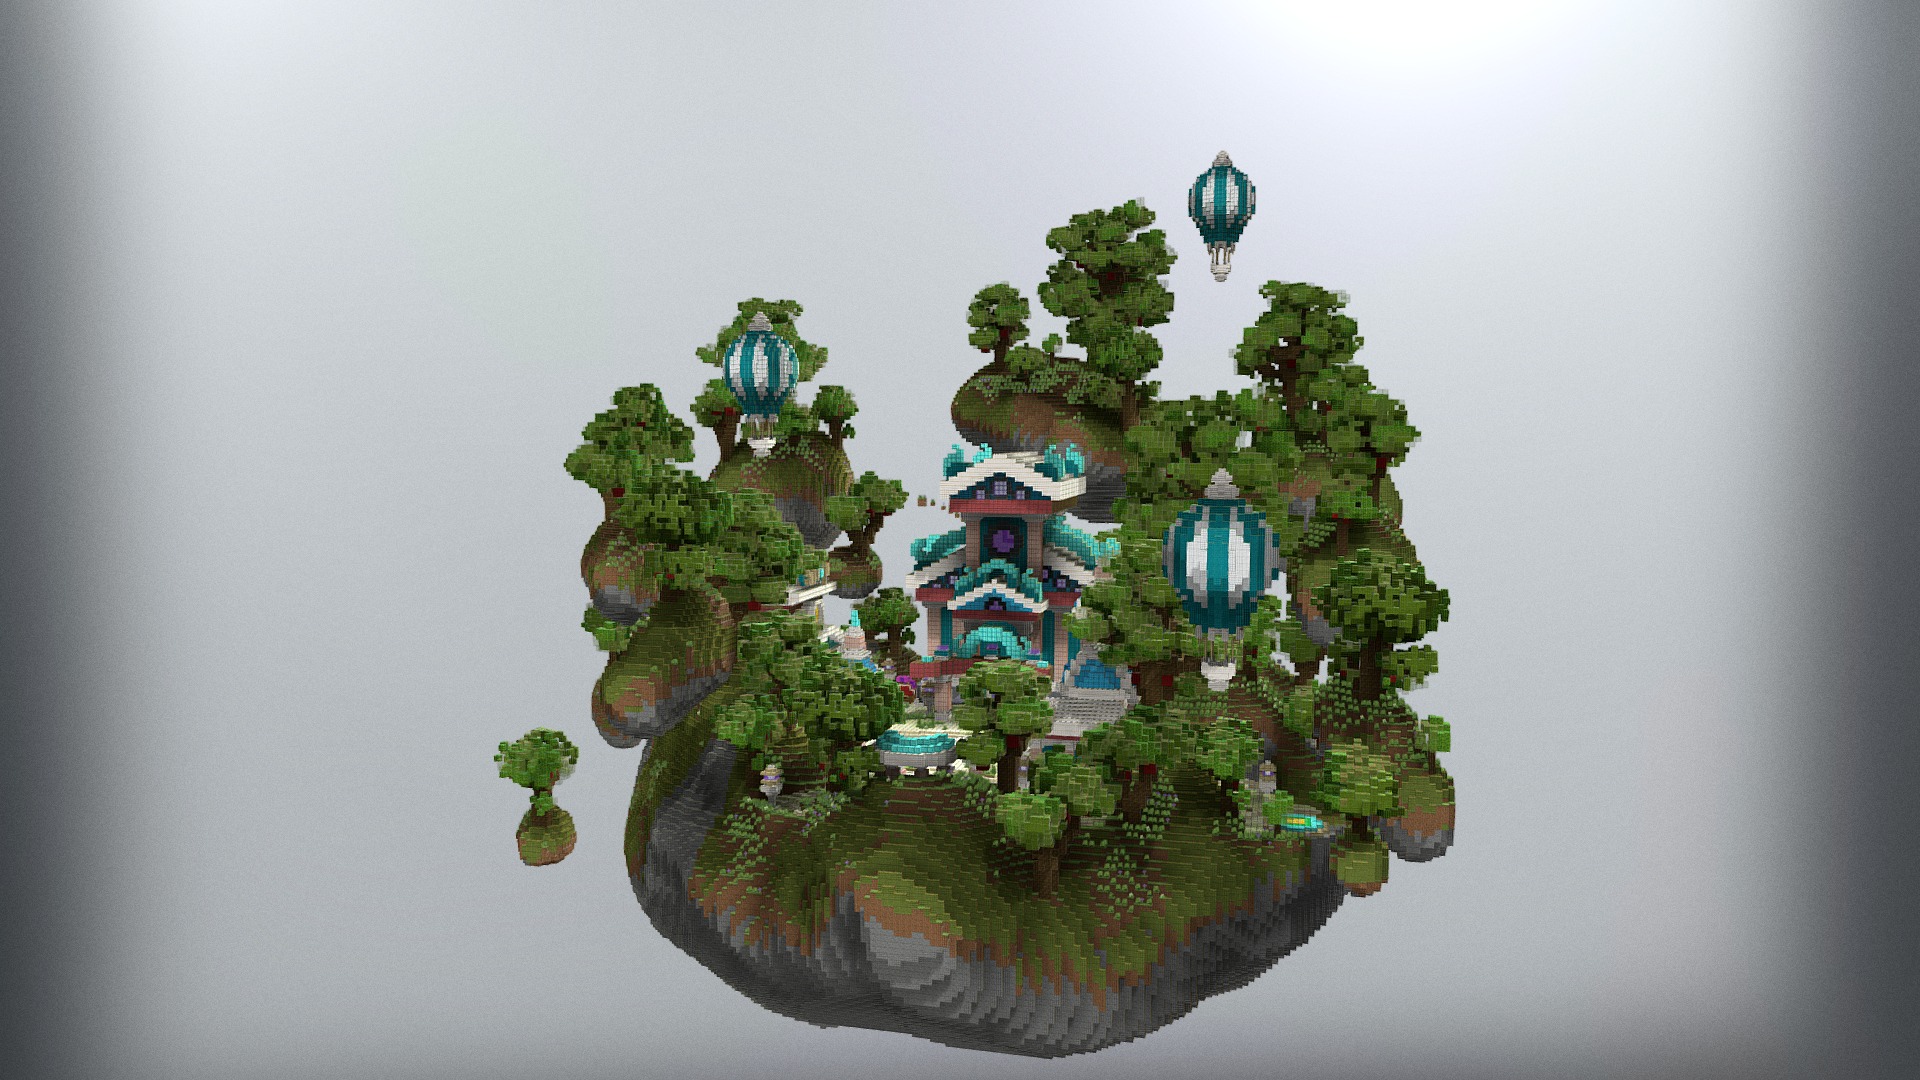 3D model Aesthetic Spawn - This is a 3D model of the Aesthetic Spawn. The 3D model is about a small building with a pond in front of it.